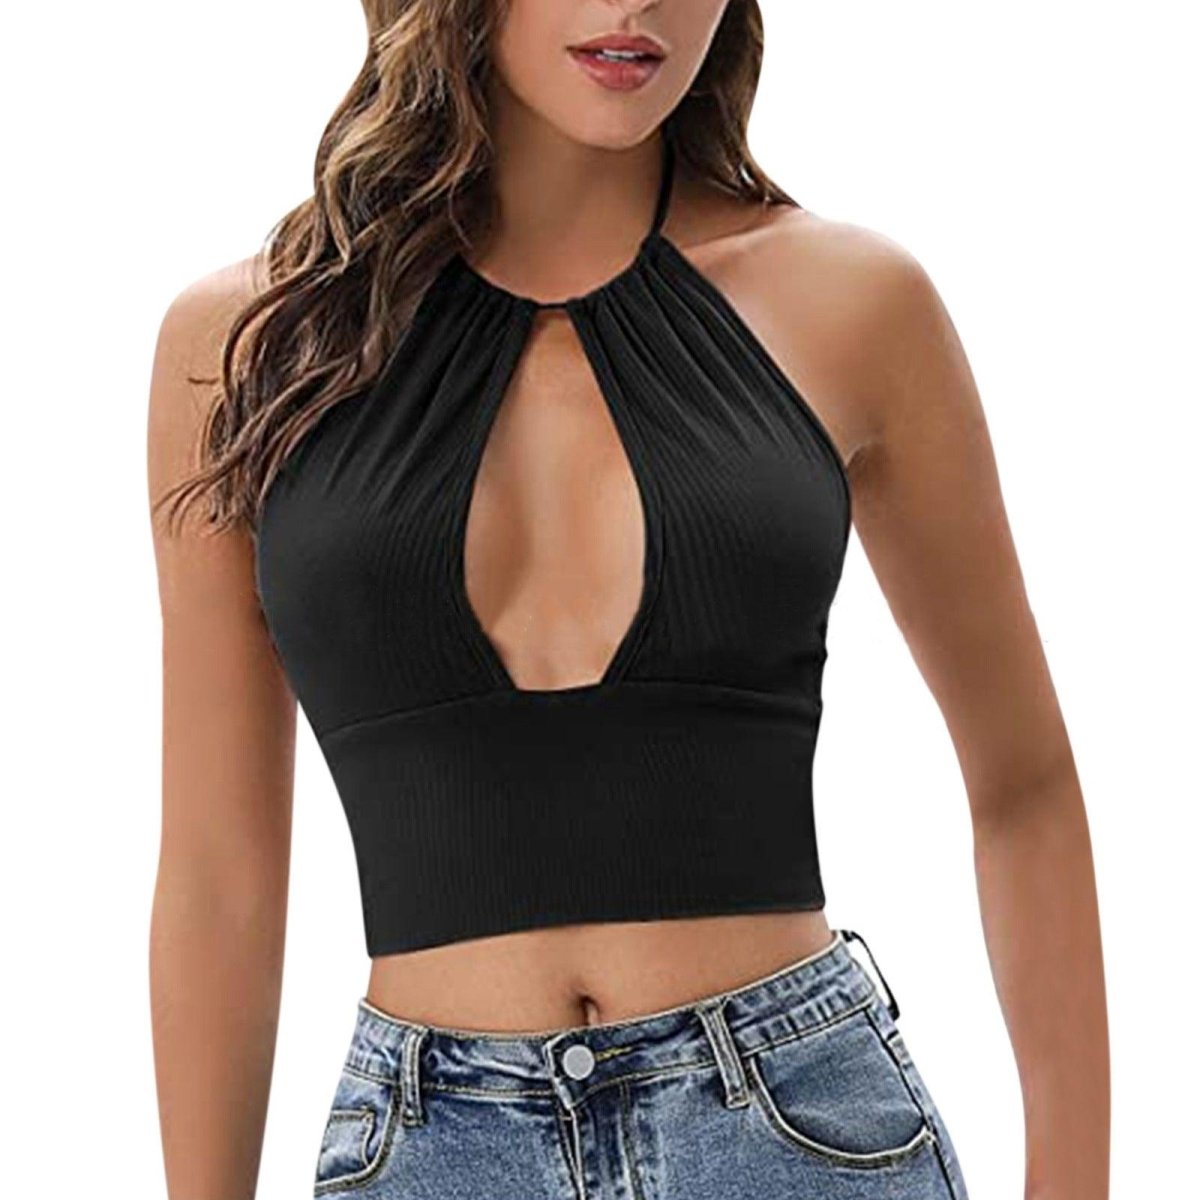 TrendyAffordables | Women's Hollow Halter Camisole for Stylish Summer Comfort - TrendyAffordables - 4